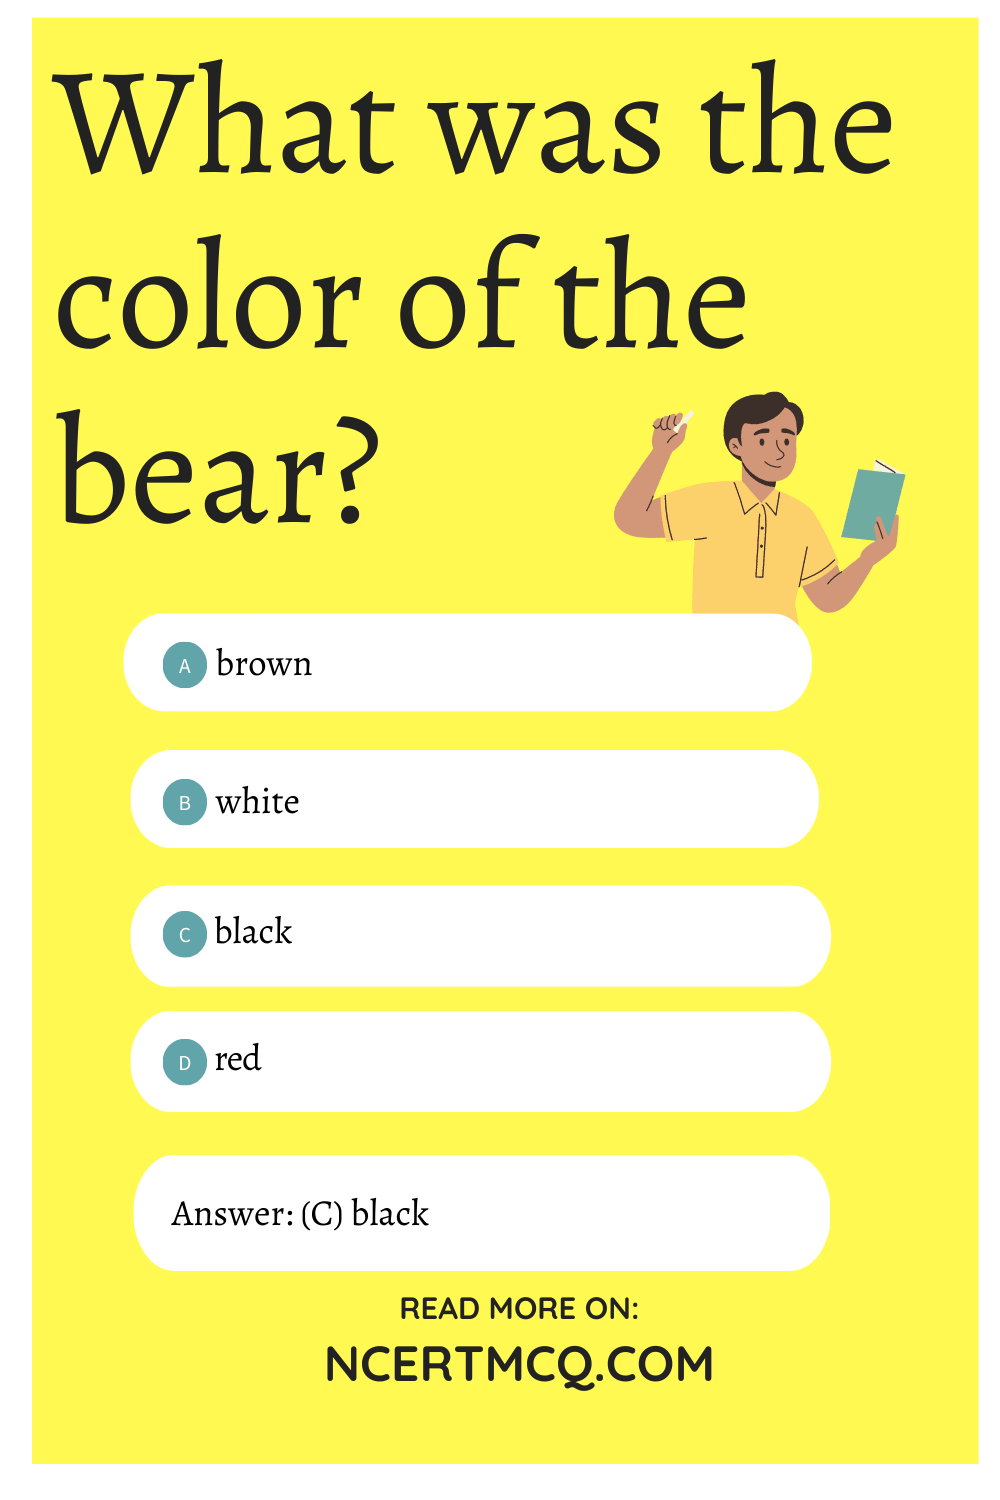 What was the color of the bear?